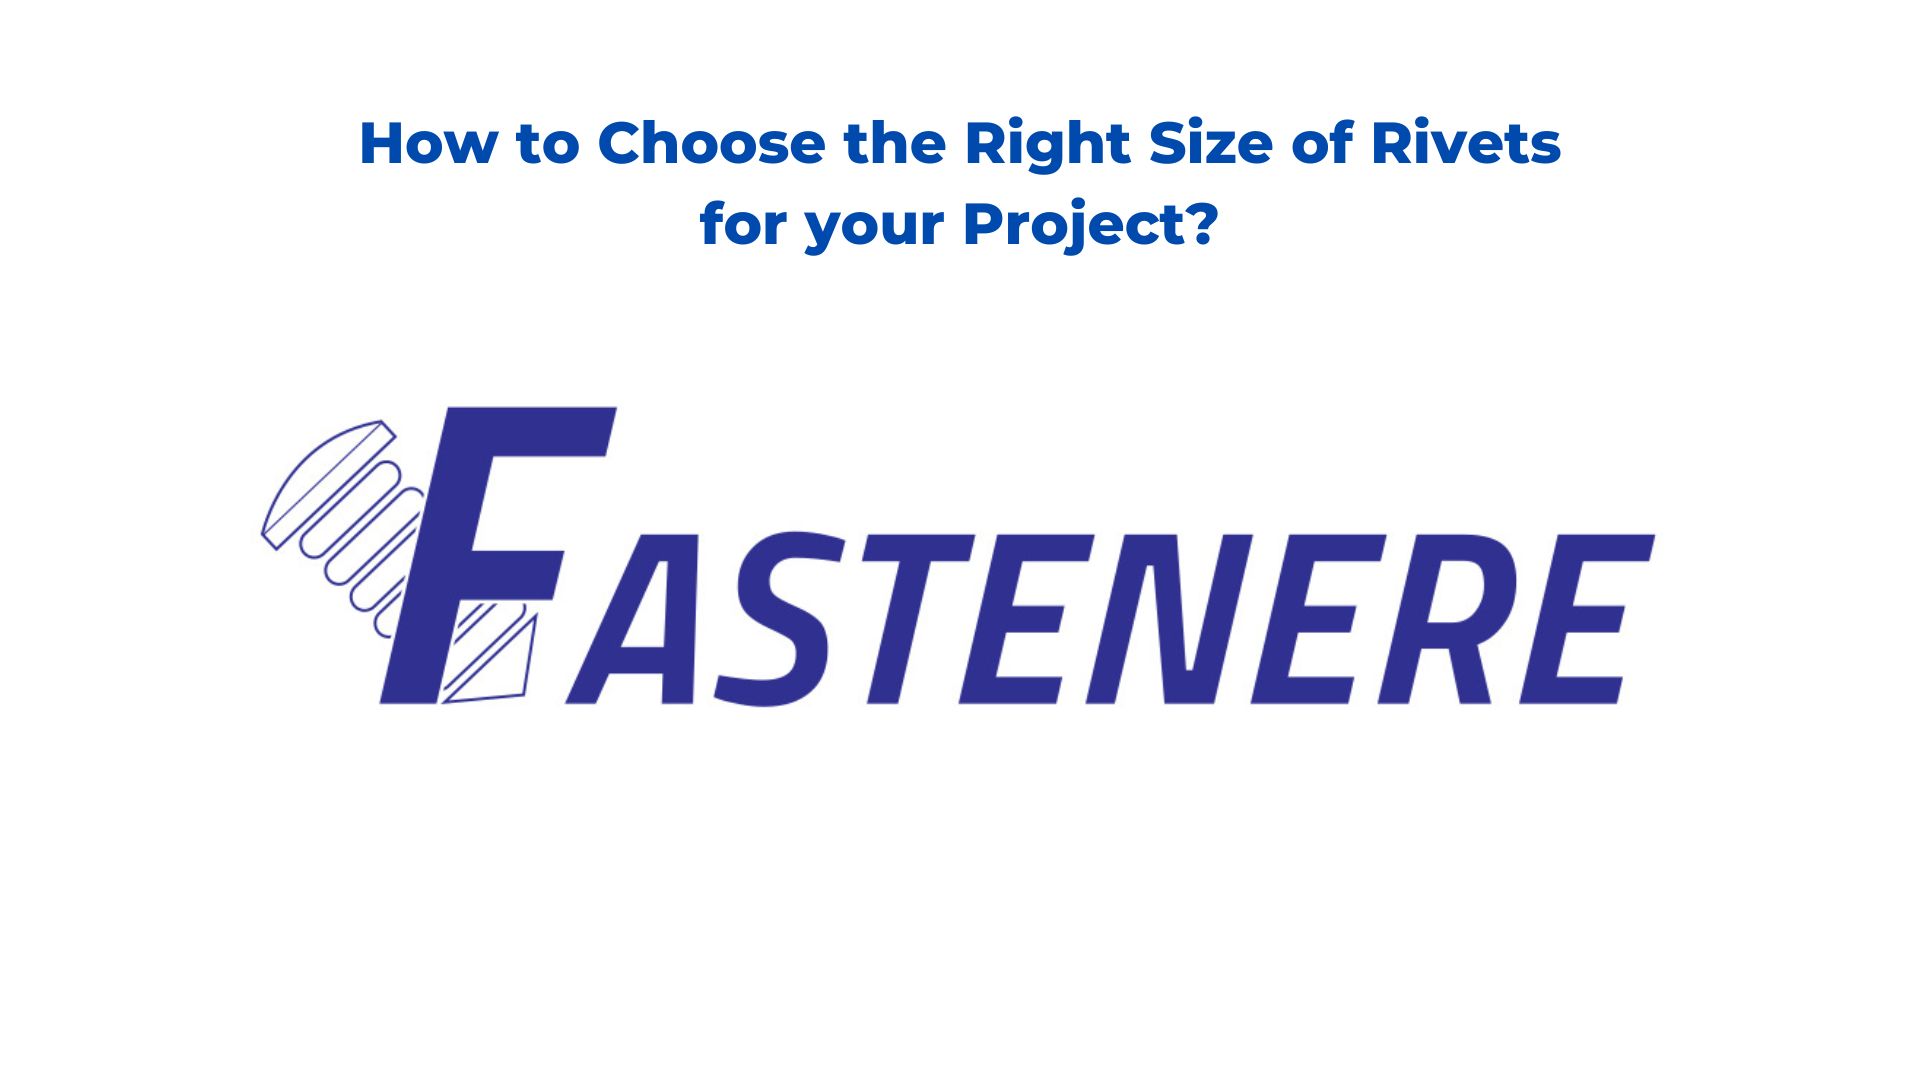 How to Choose the Right Size of Rivet for your Project?